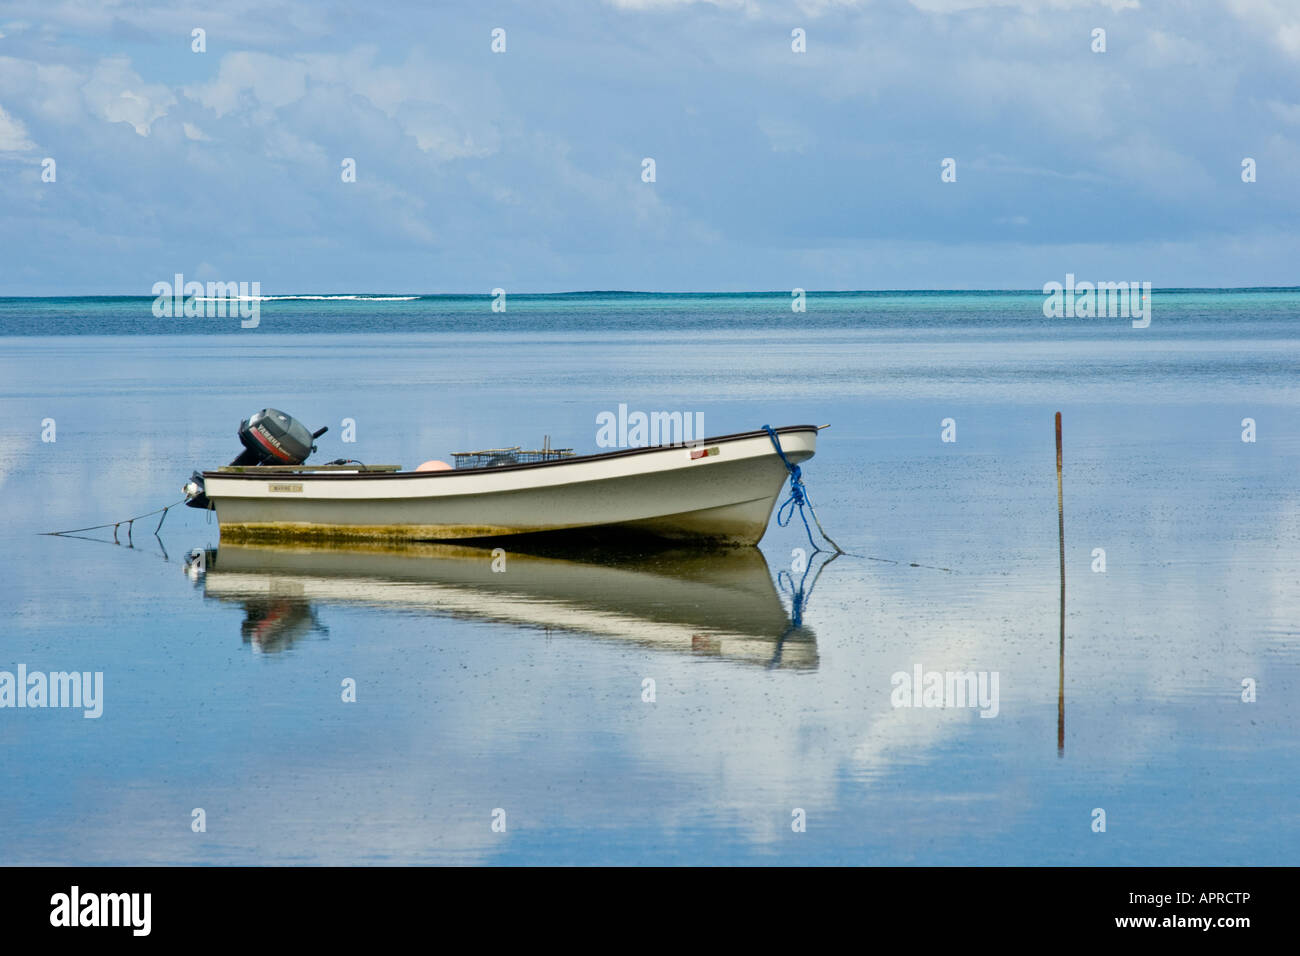 Small Motorboat and Reflection Yap Island Stock Photo